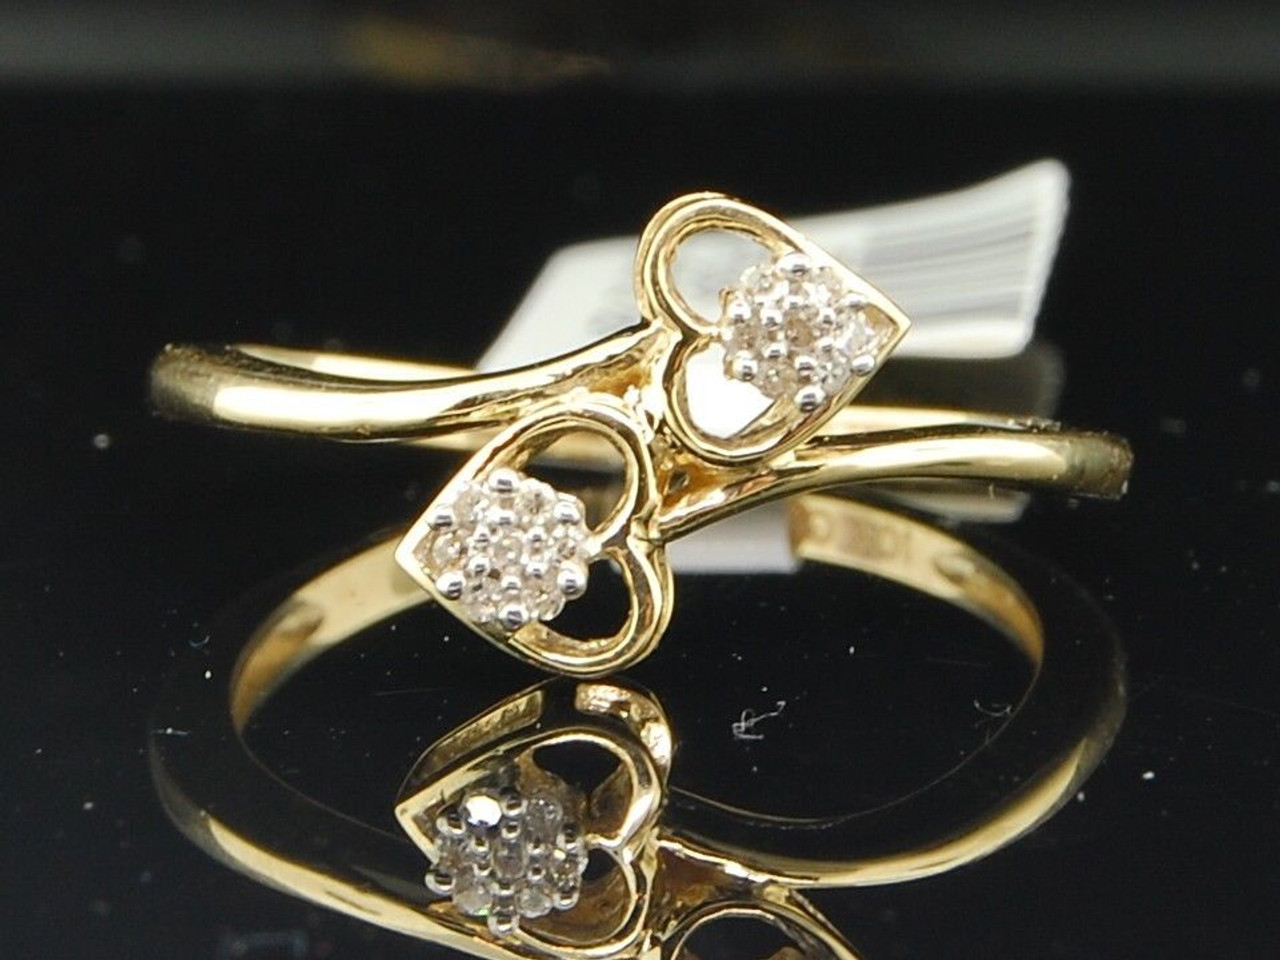 Buy Gold-Toned Rings for Women by Giva Online | Ajio.com